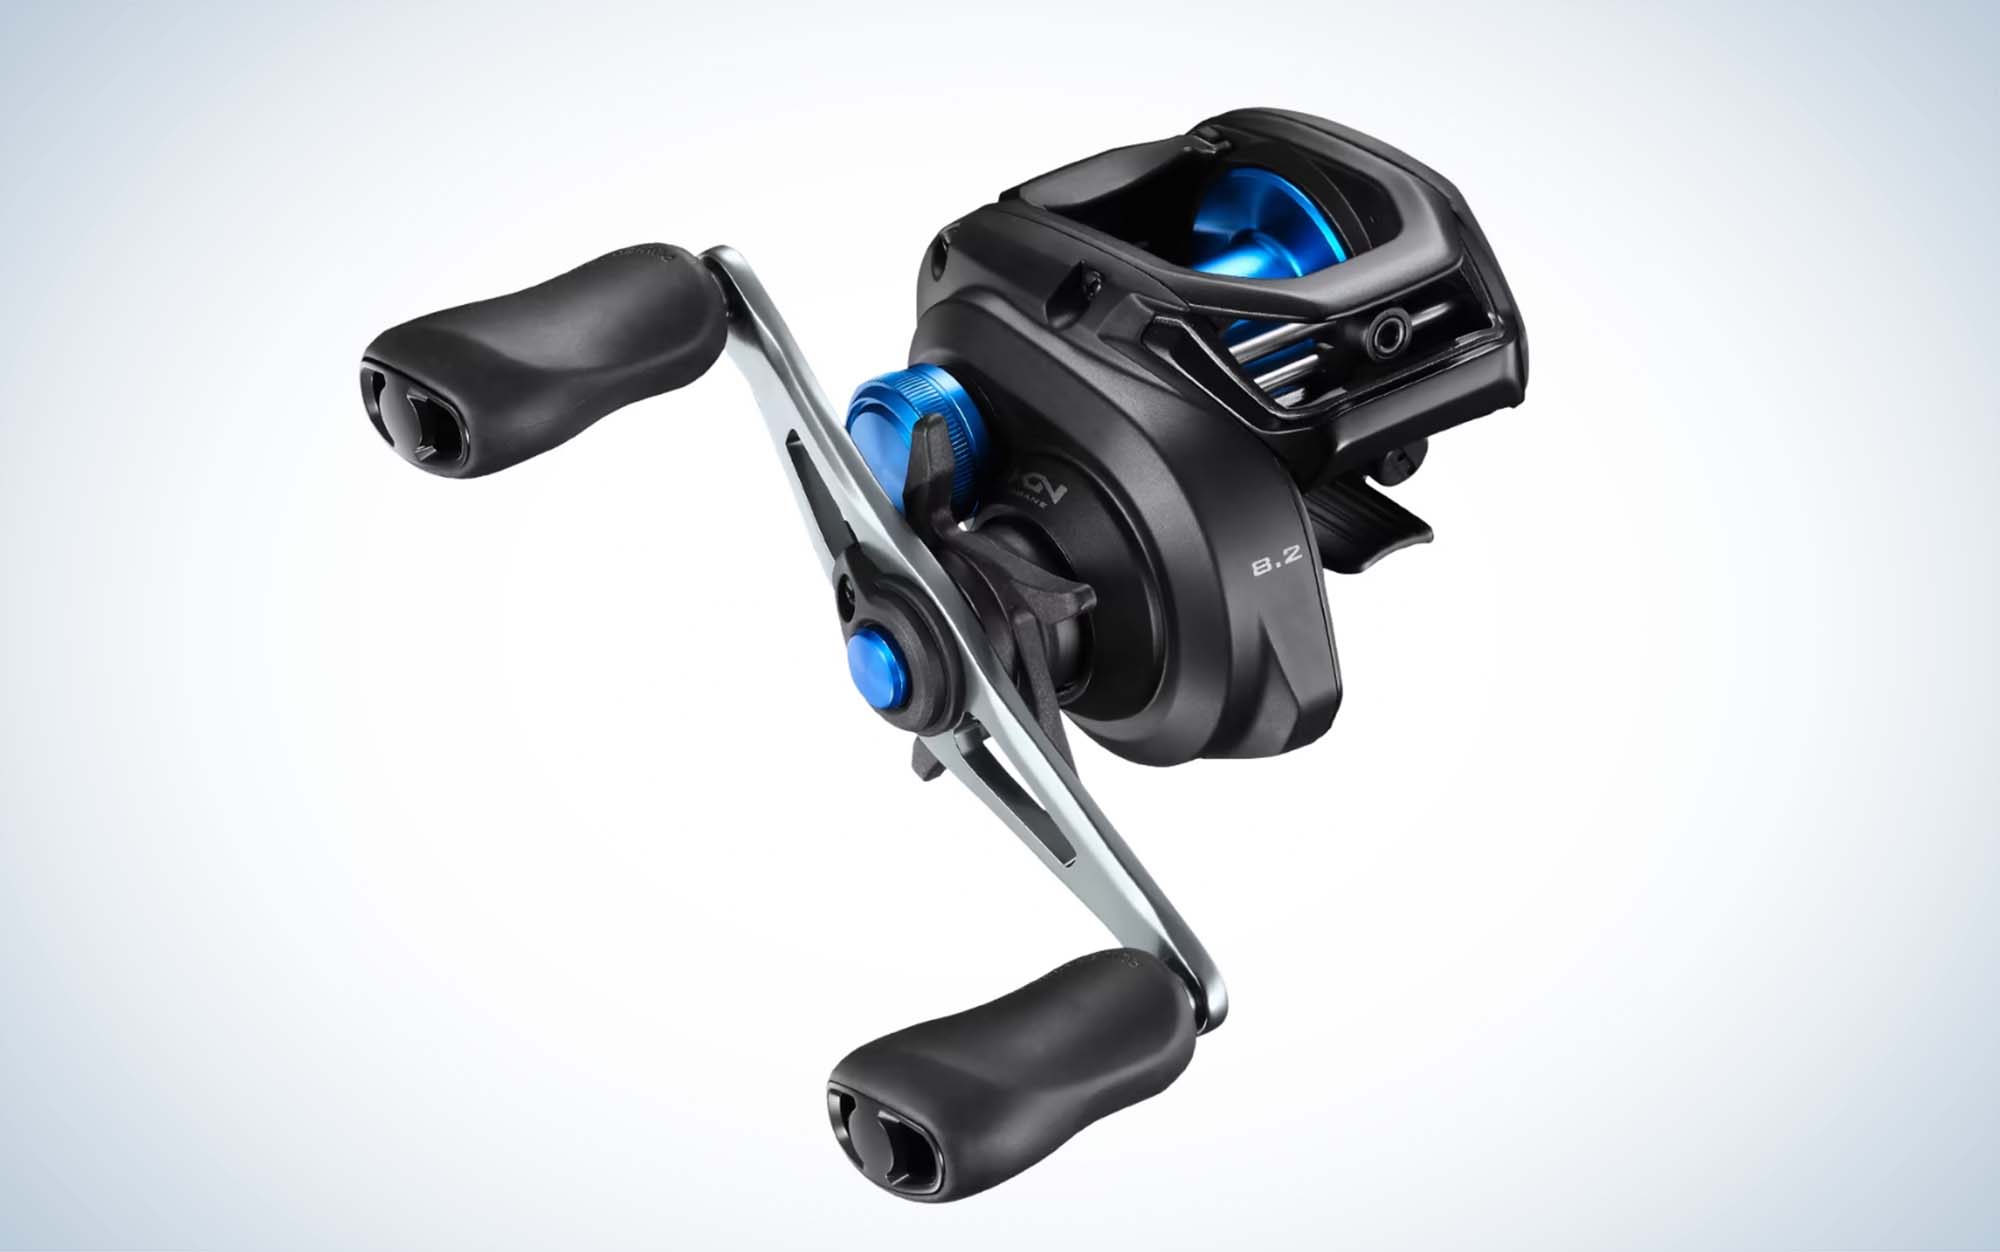 Baitcasting Reel New Compact Design Fishing reels LightWeight Ultra Smooth  Powerful Available in 6.3:1 Gear Ratios 12+1 Stainless Steel Ball Bearings  Perfect for Freshwater and Ice Fishing Palm Design : Buy Online